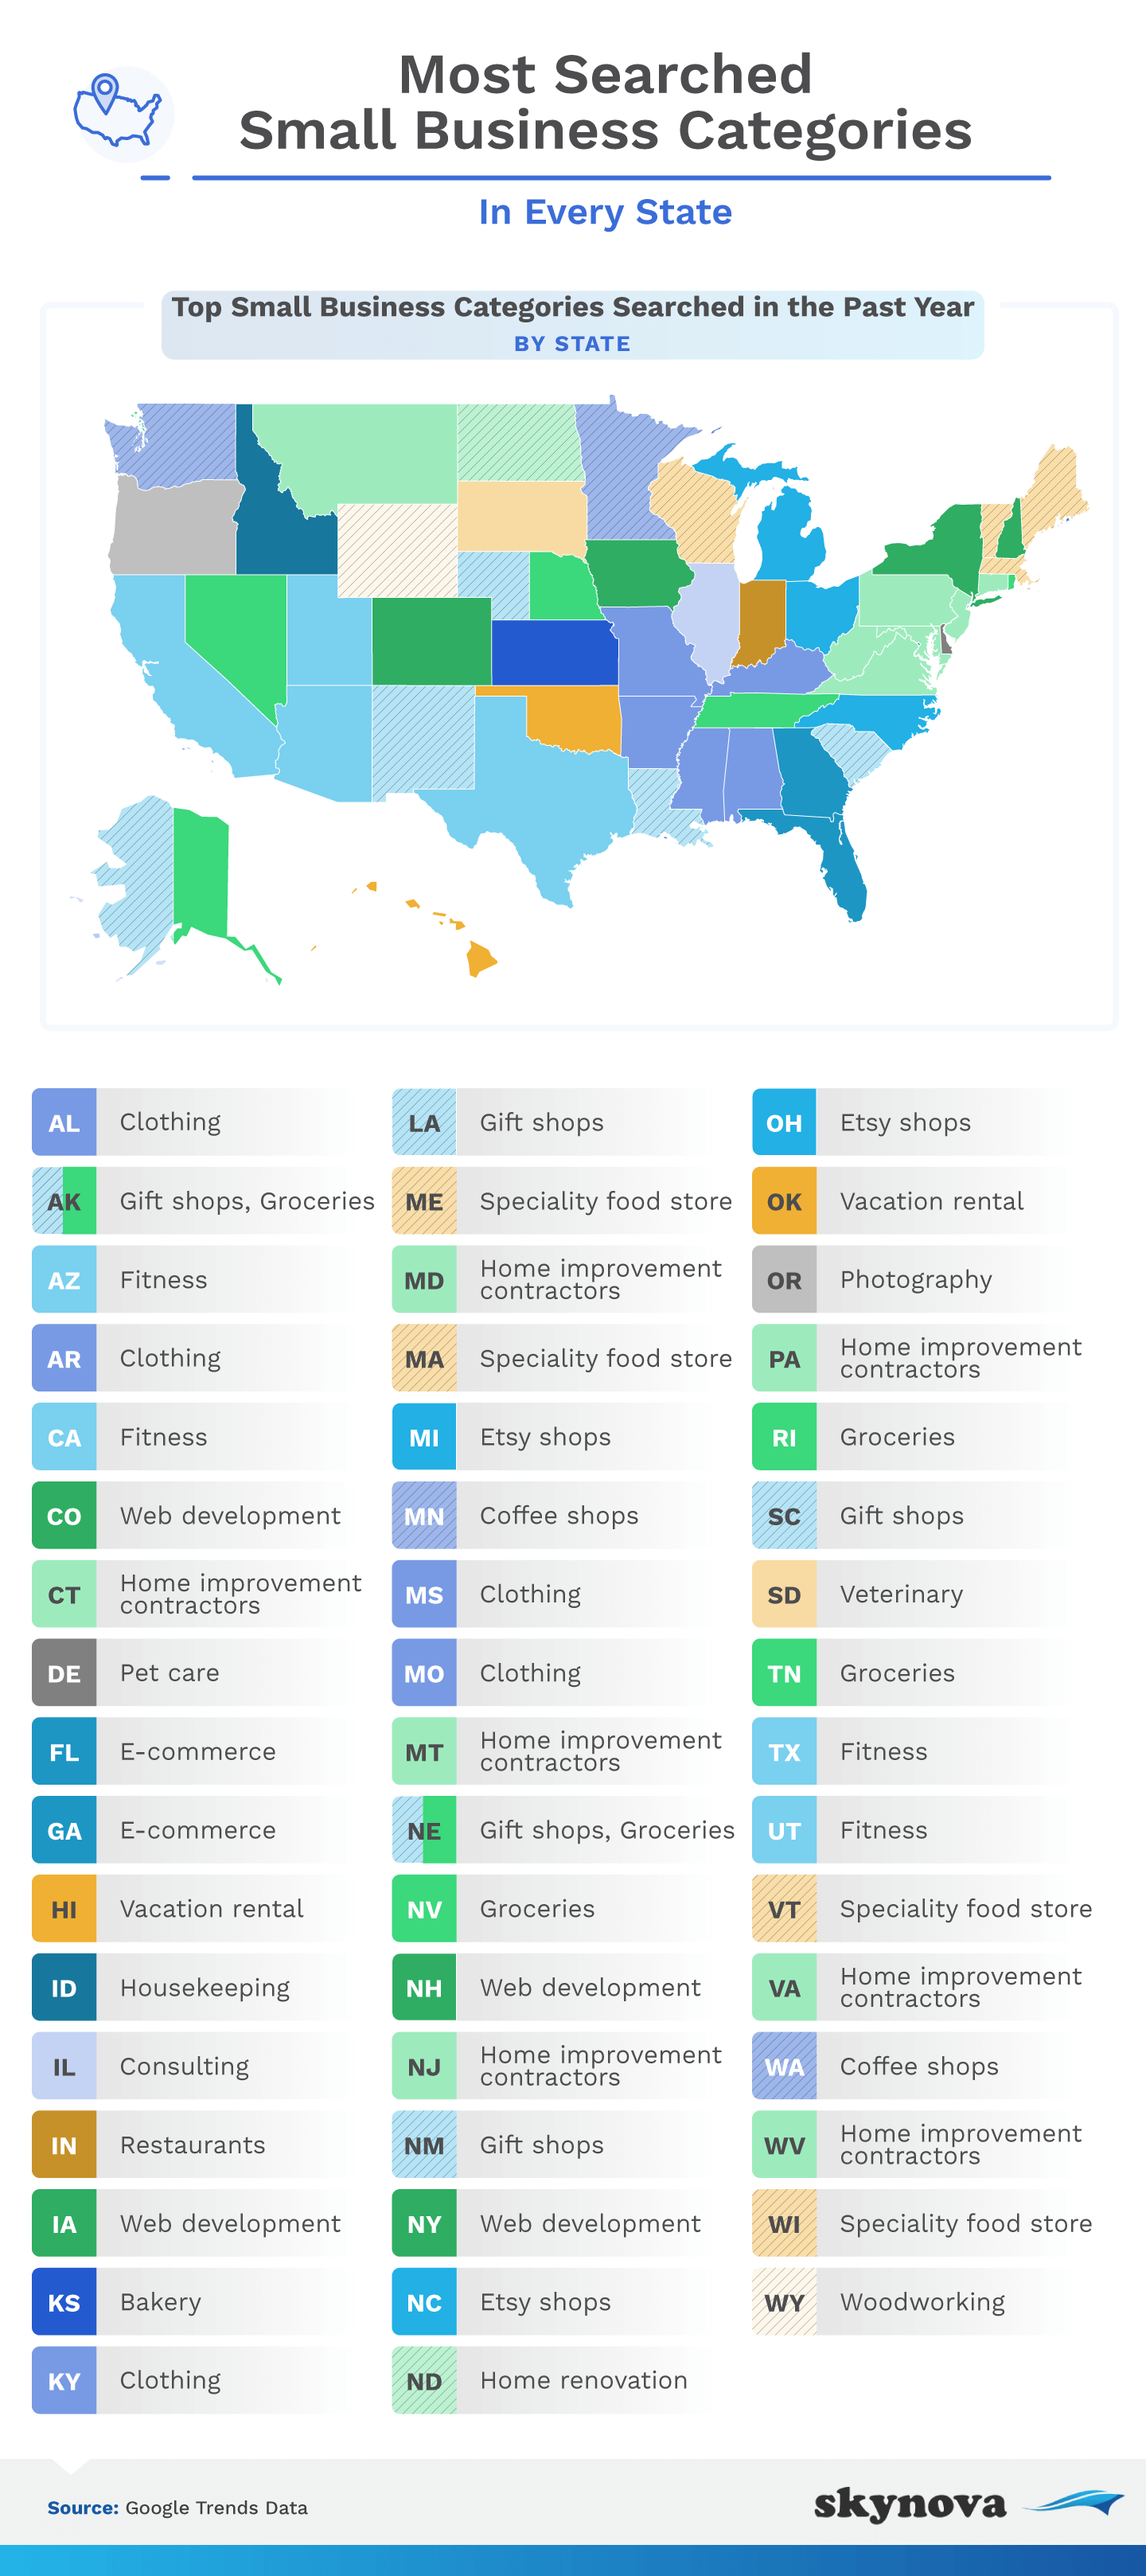 Most searched small business categories by state